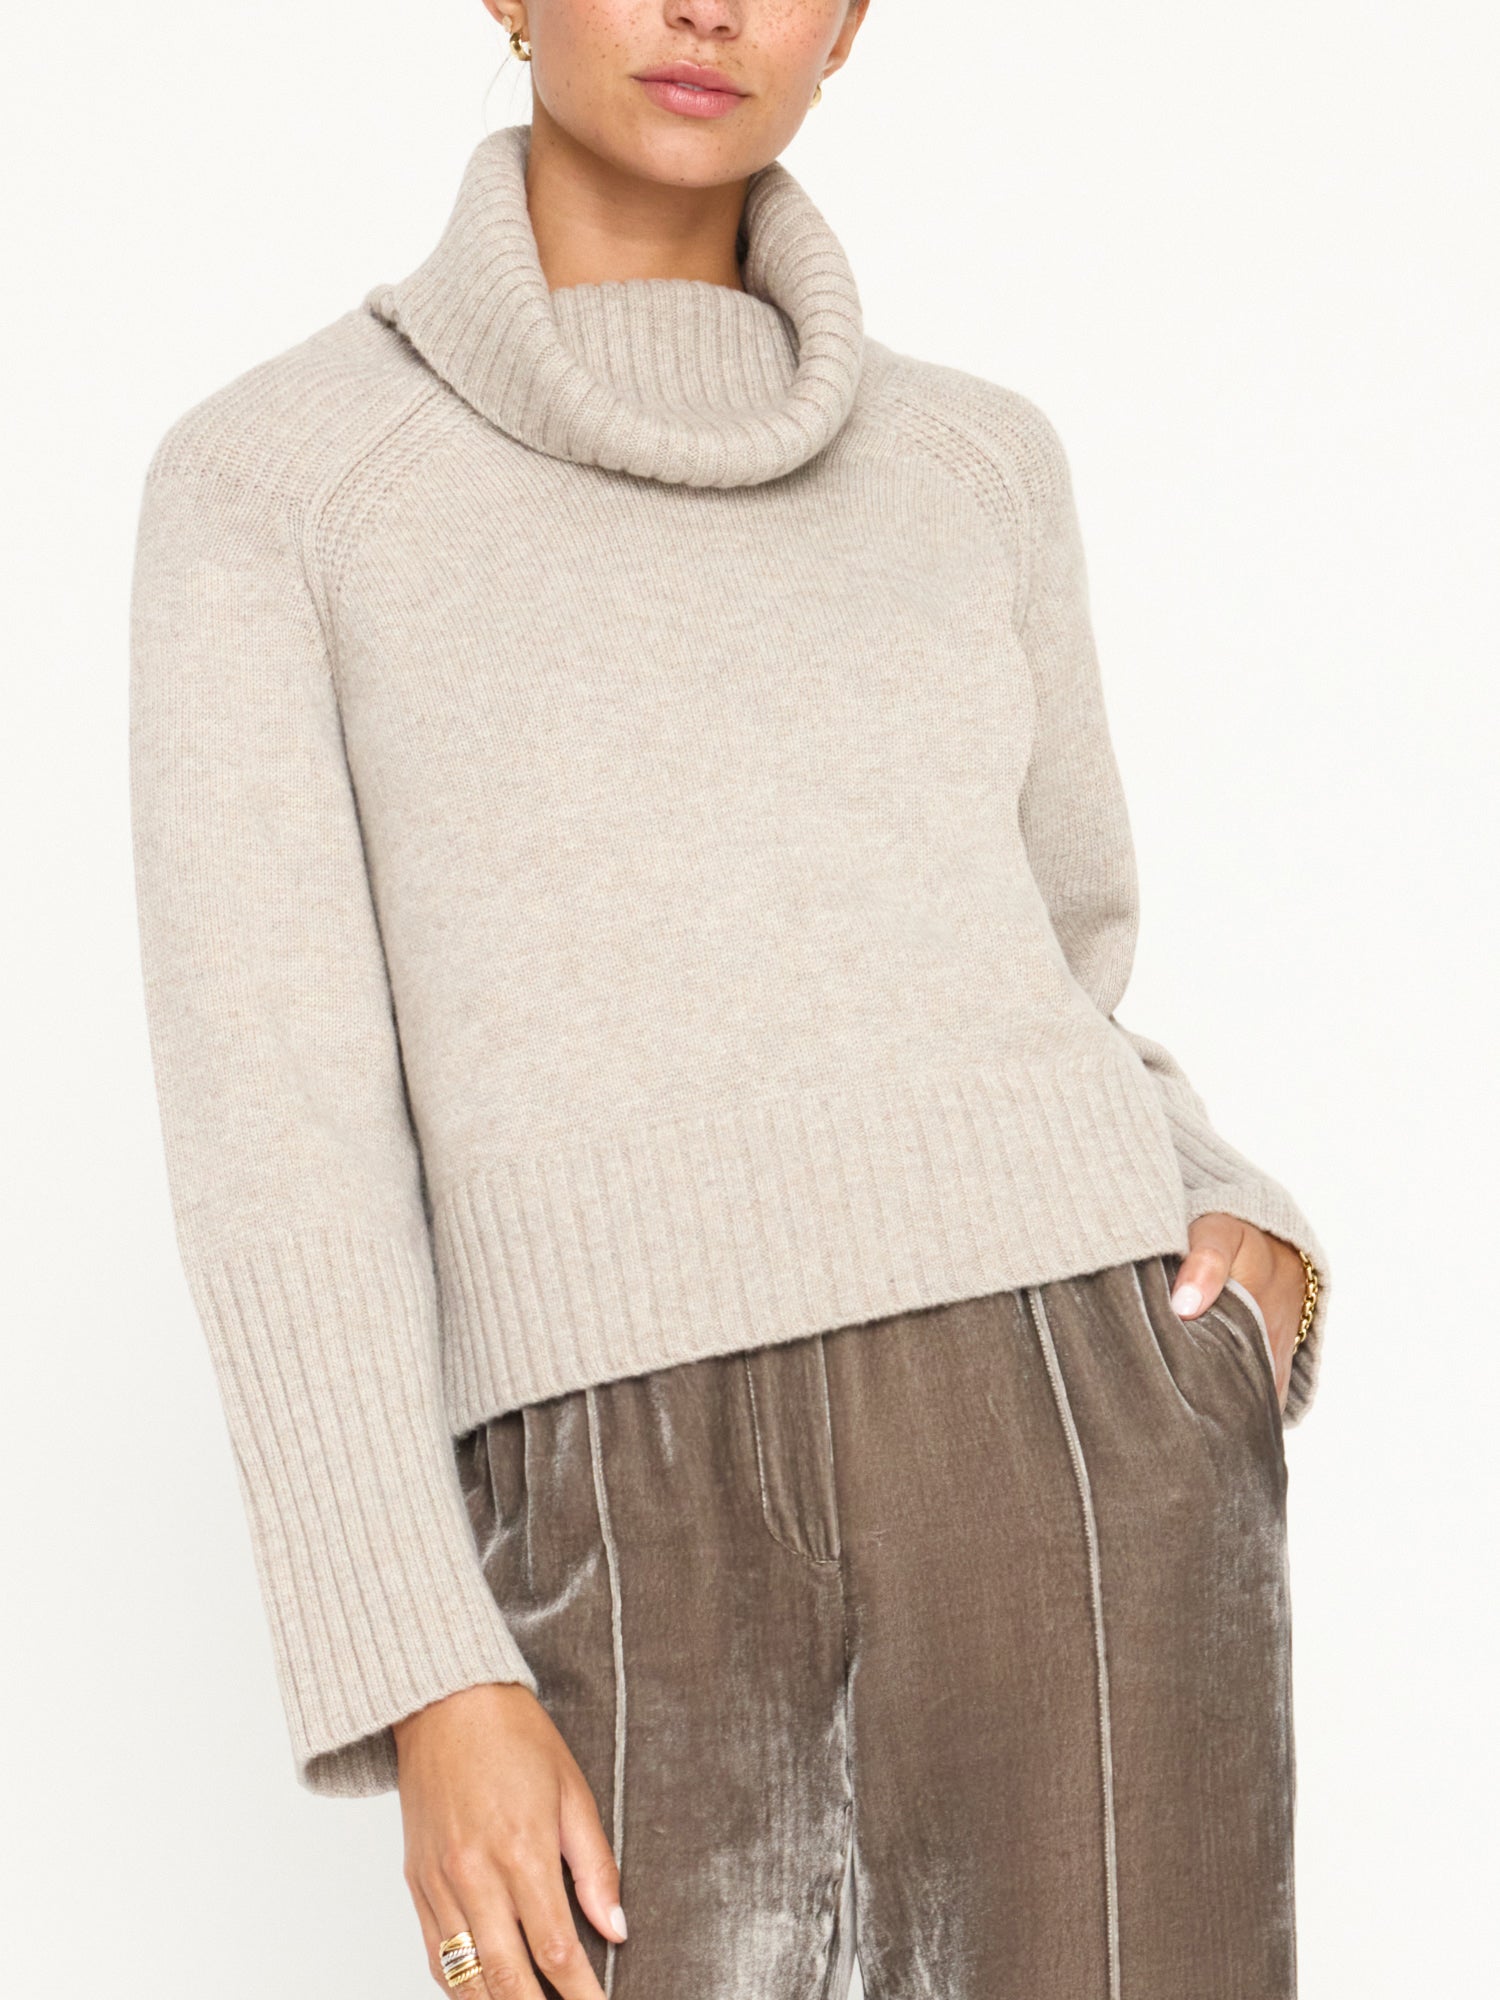 Orion cashmere-wool light grey turtleneck sweater  front view 2 